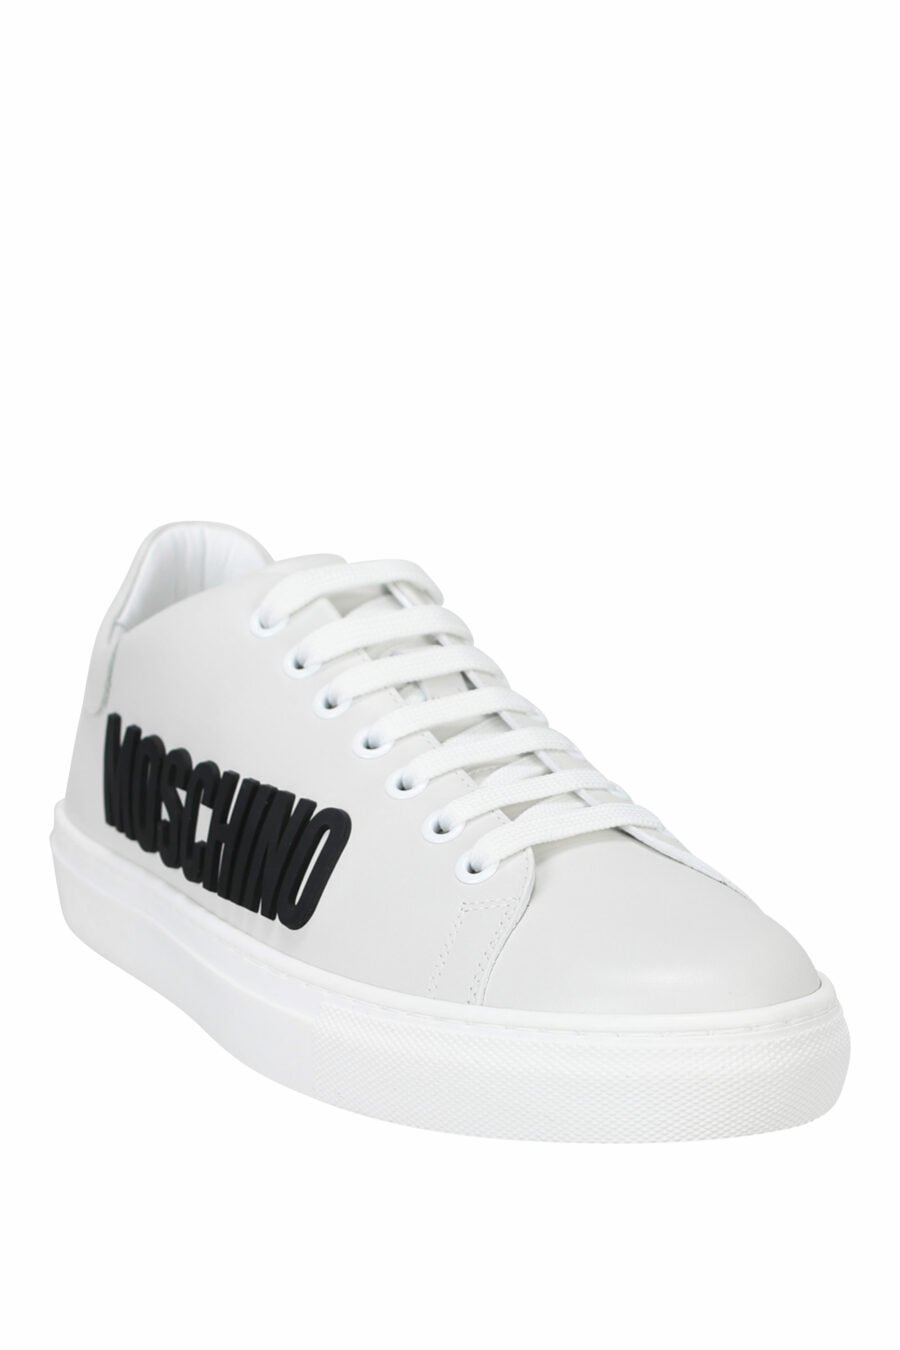 White trainers with black "lettering" logo - 8054653099241 1